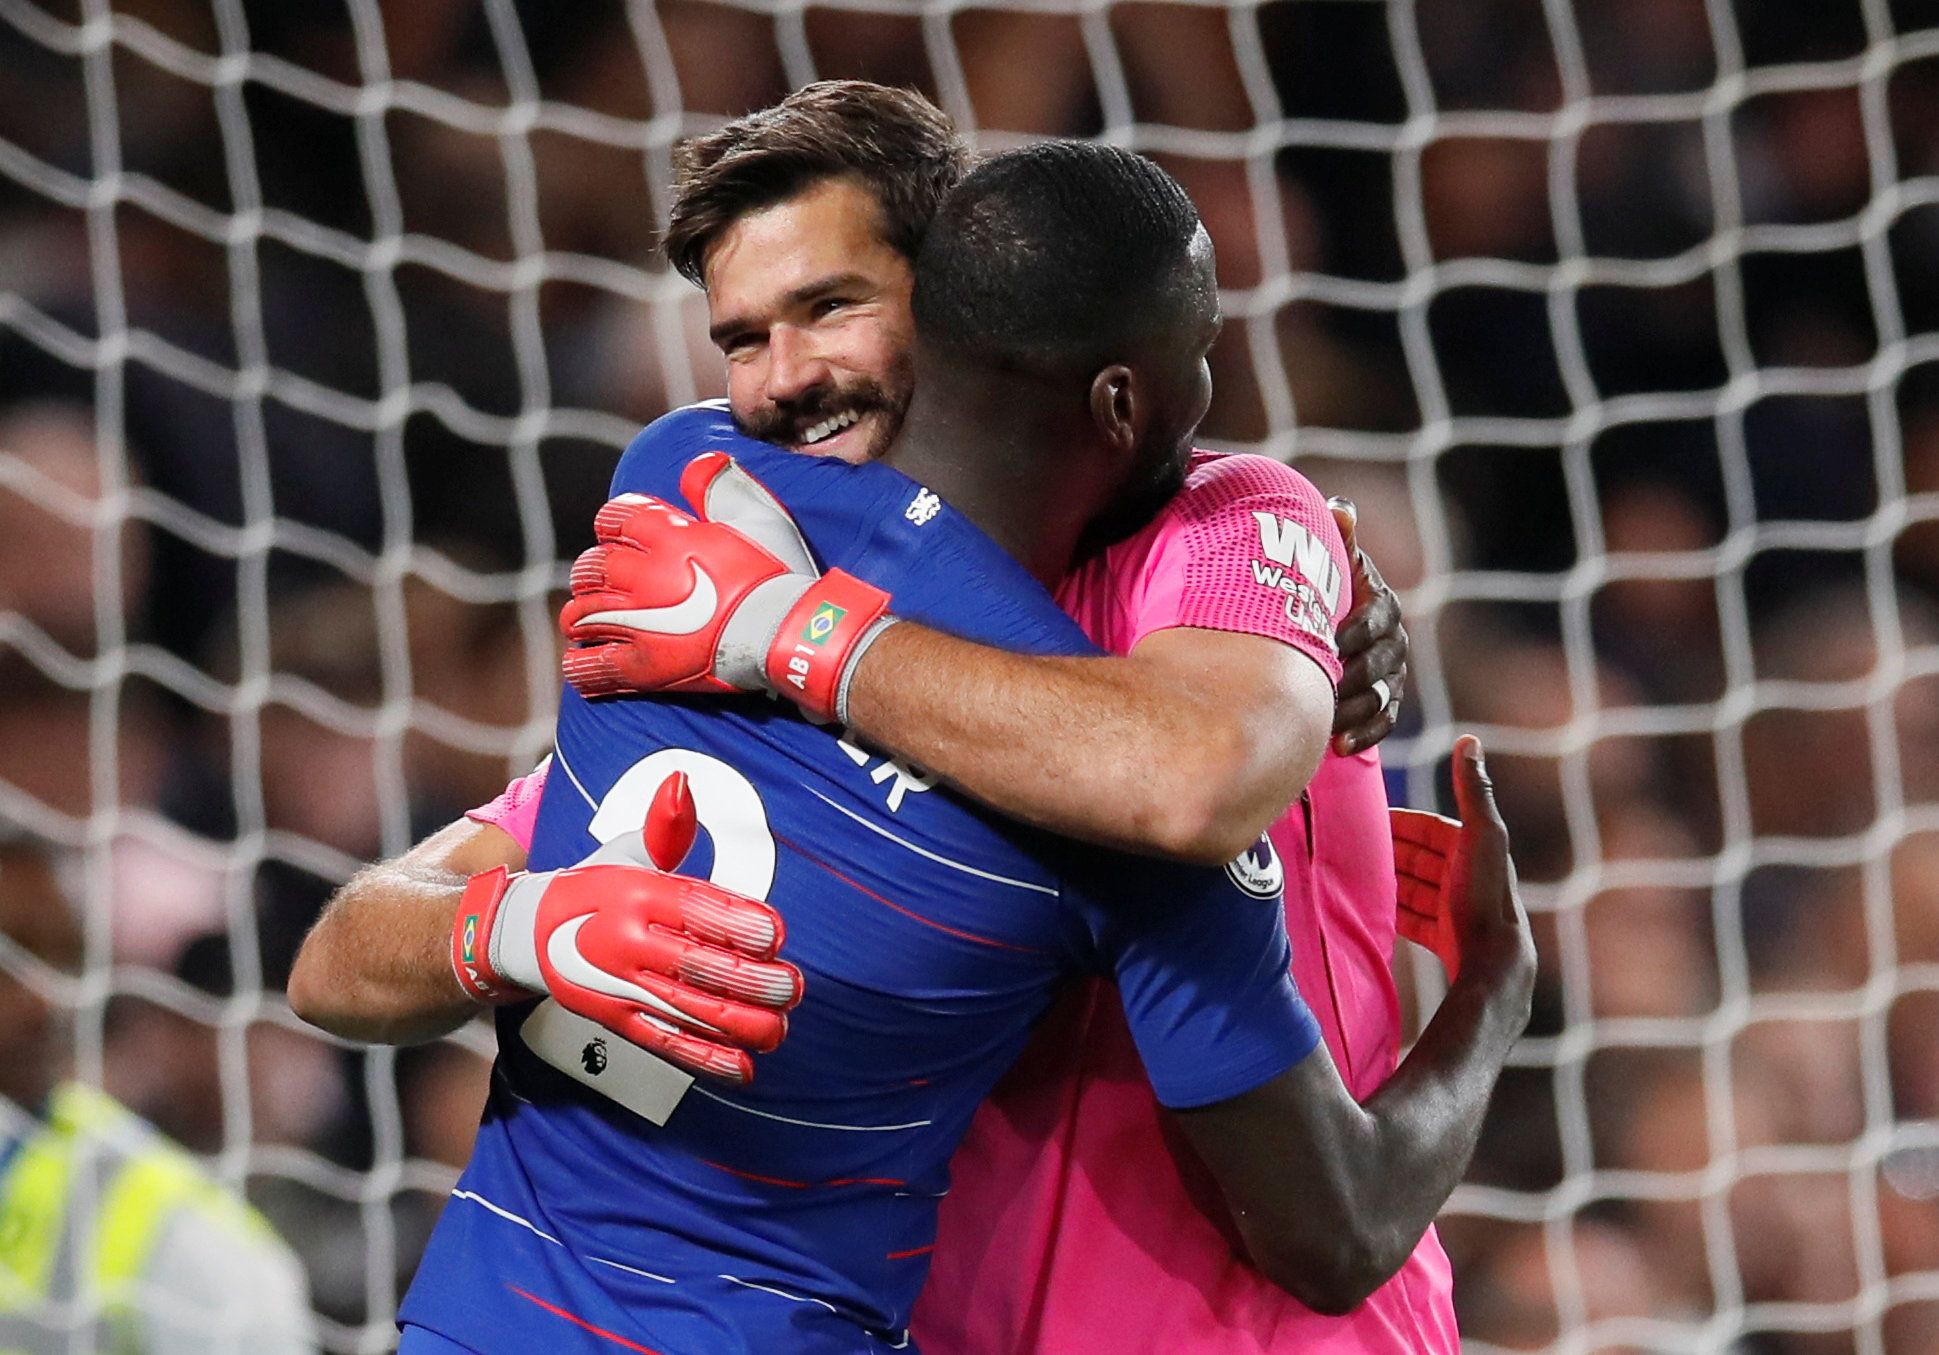 Soccer Football - Premier League - Chelsea v Liverpool - Stamford Bridge, London, Britain - September 29, 2018  Chelsea's Antonio Rudiger embraces Liverpool's Alisson after the match     REUTERS/David Klein  EDITORIAL USE ONLY. No use with unauthorized audio, video, data, fixture lists, club/league logos or 